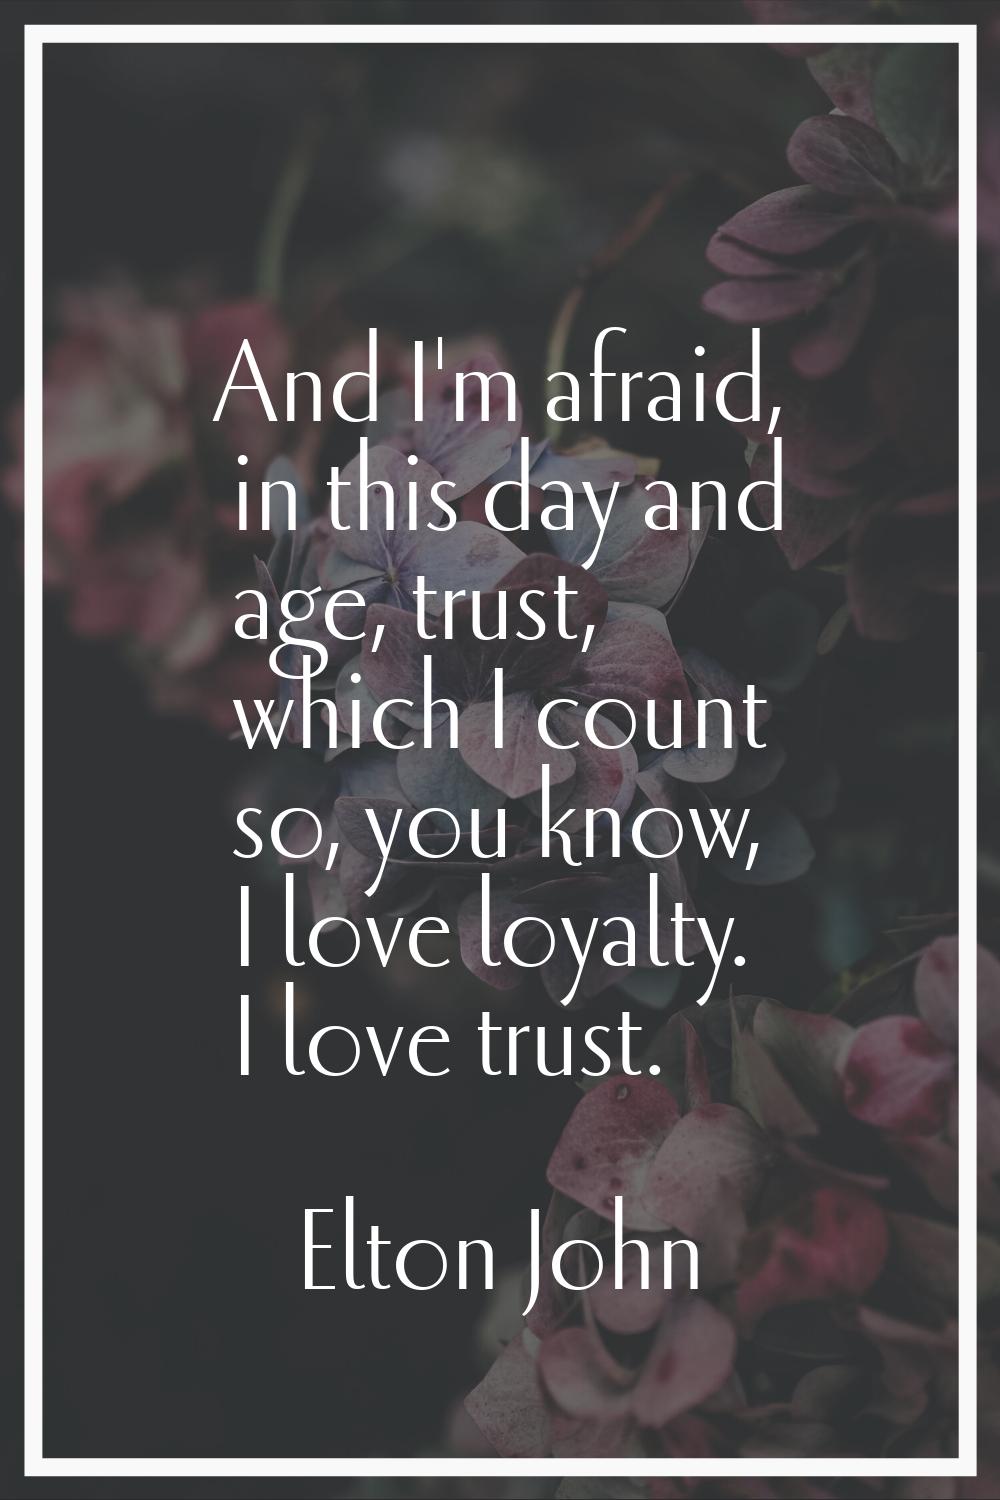 And I'm afraid, in this day and age, trust, which I count so, you know, I love loyalty. I love trus